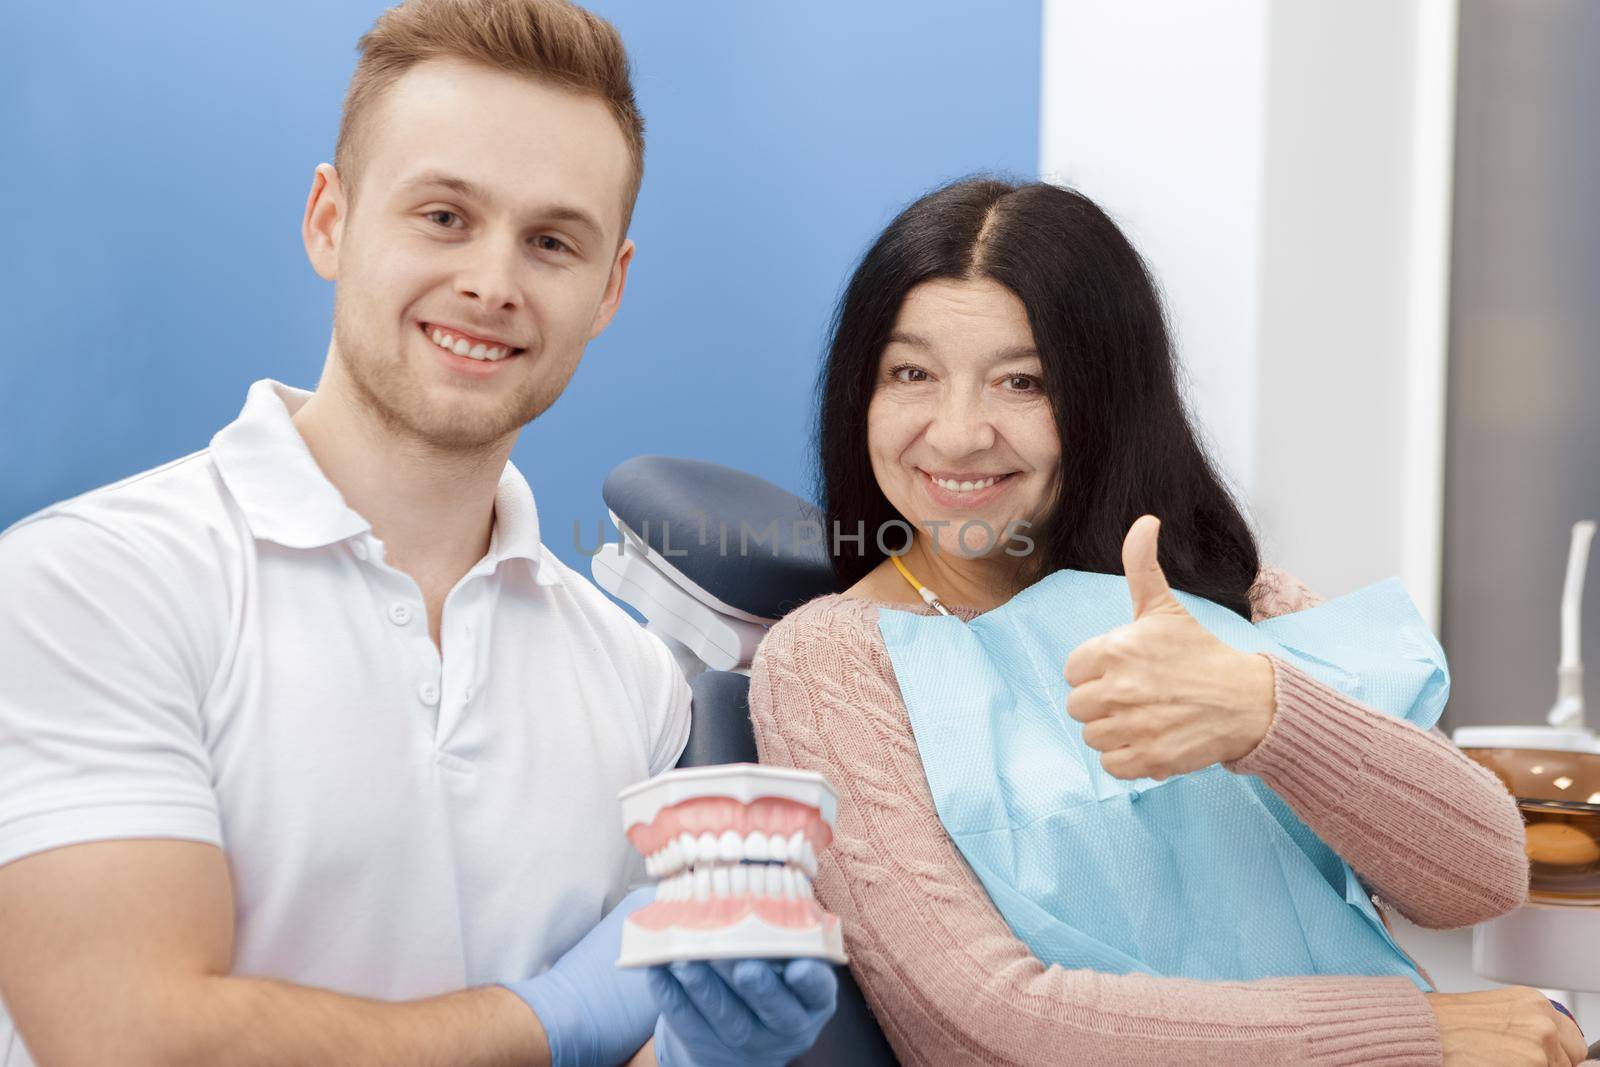 Perfectly healthy! Senior woman smiling happily showing thumbs up at the dental clinic her dentist smiling to the camera holding teeth mold profession communication trust medicine people dentistry